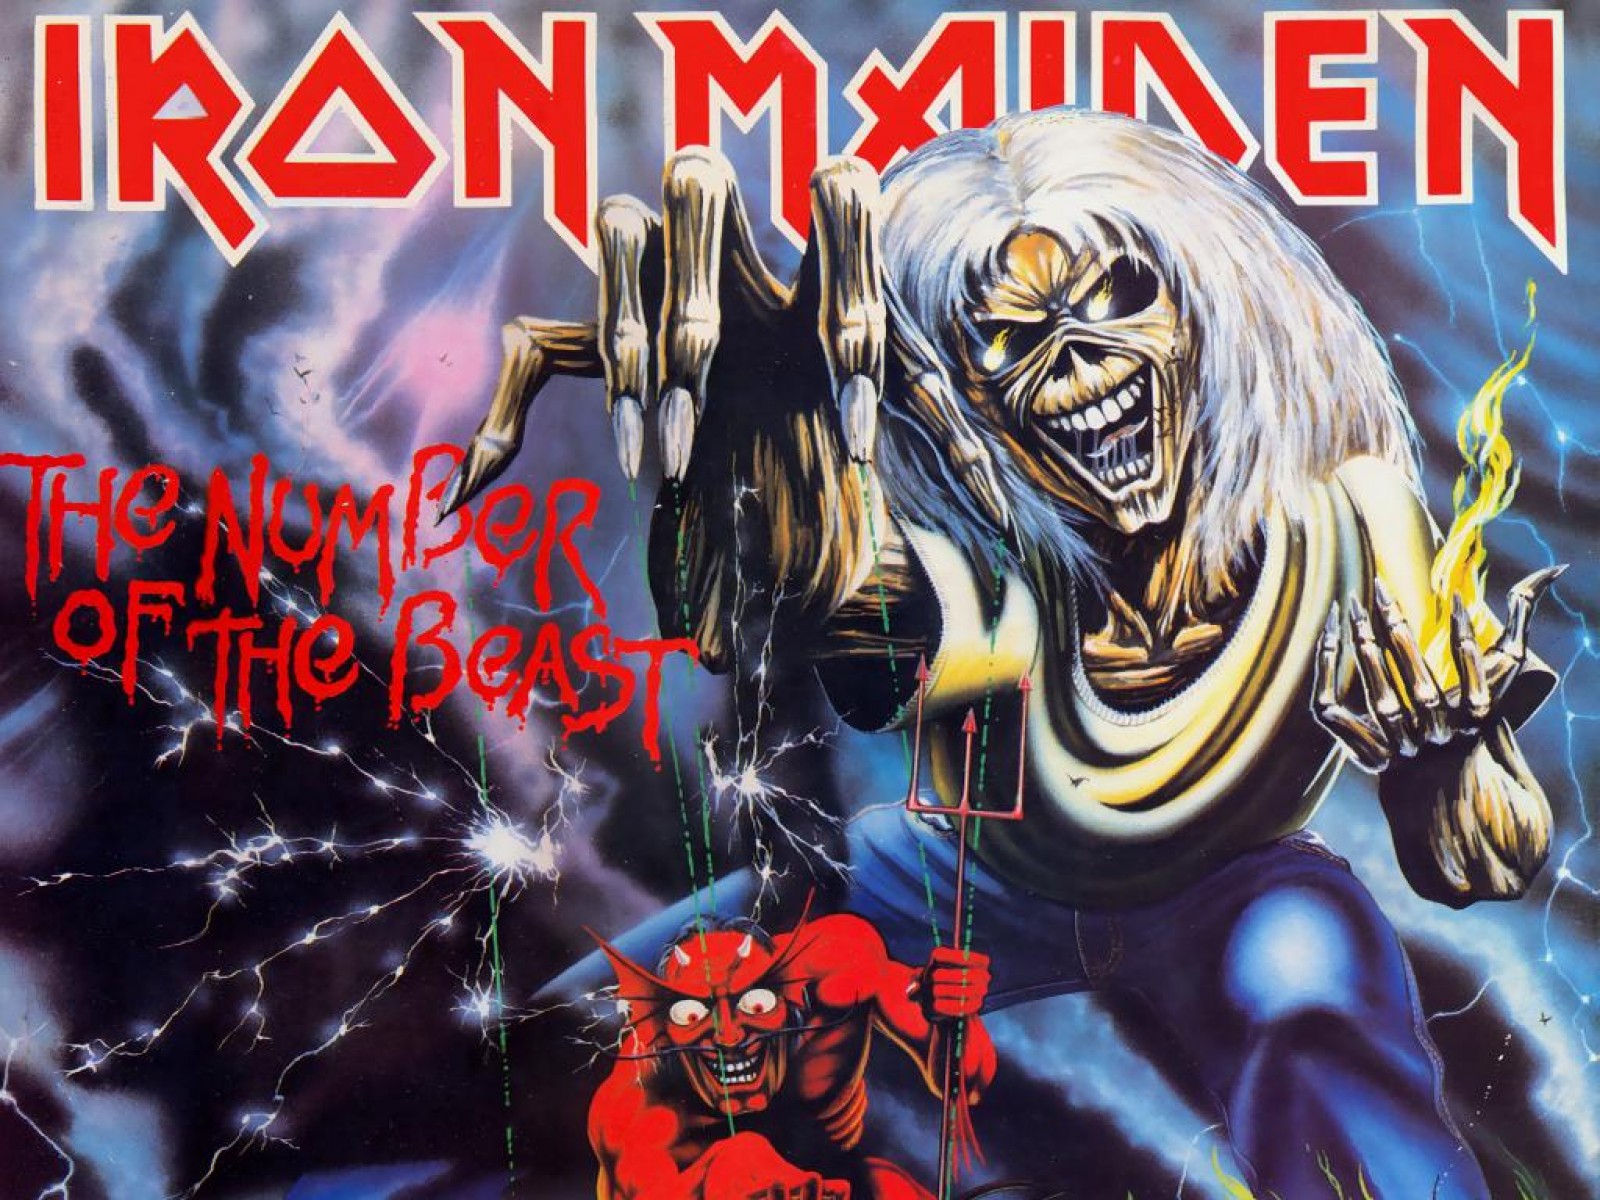 Mobile wallpaper: Music, Iron Maiden, 582783 download the picture for free.